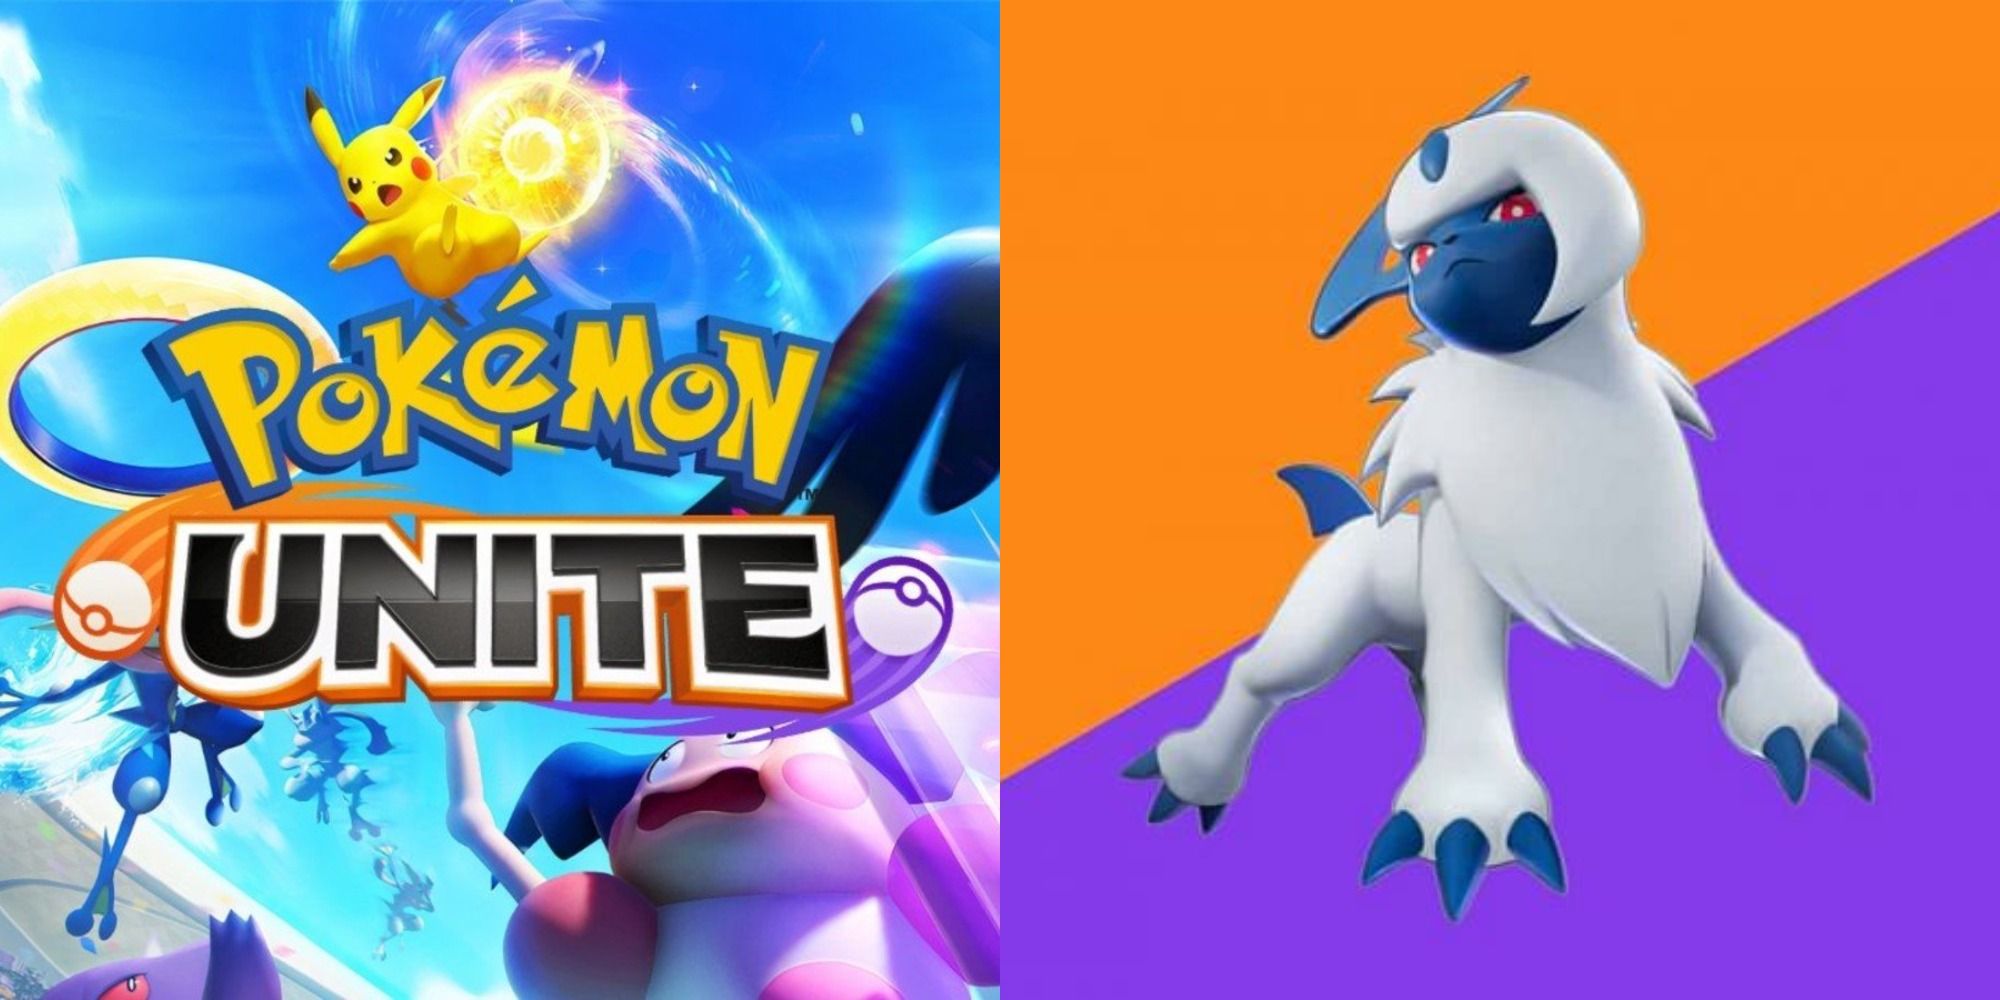 Split image showing the poster for Pokémon Unite and a promo image for Absol